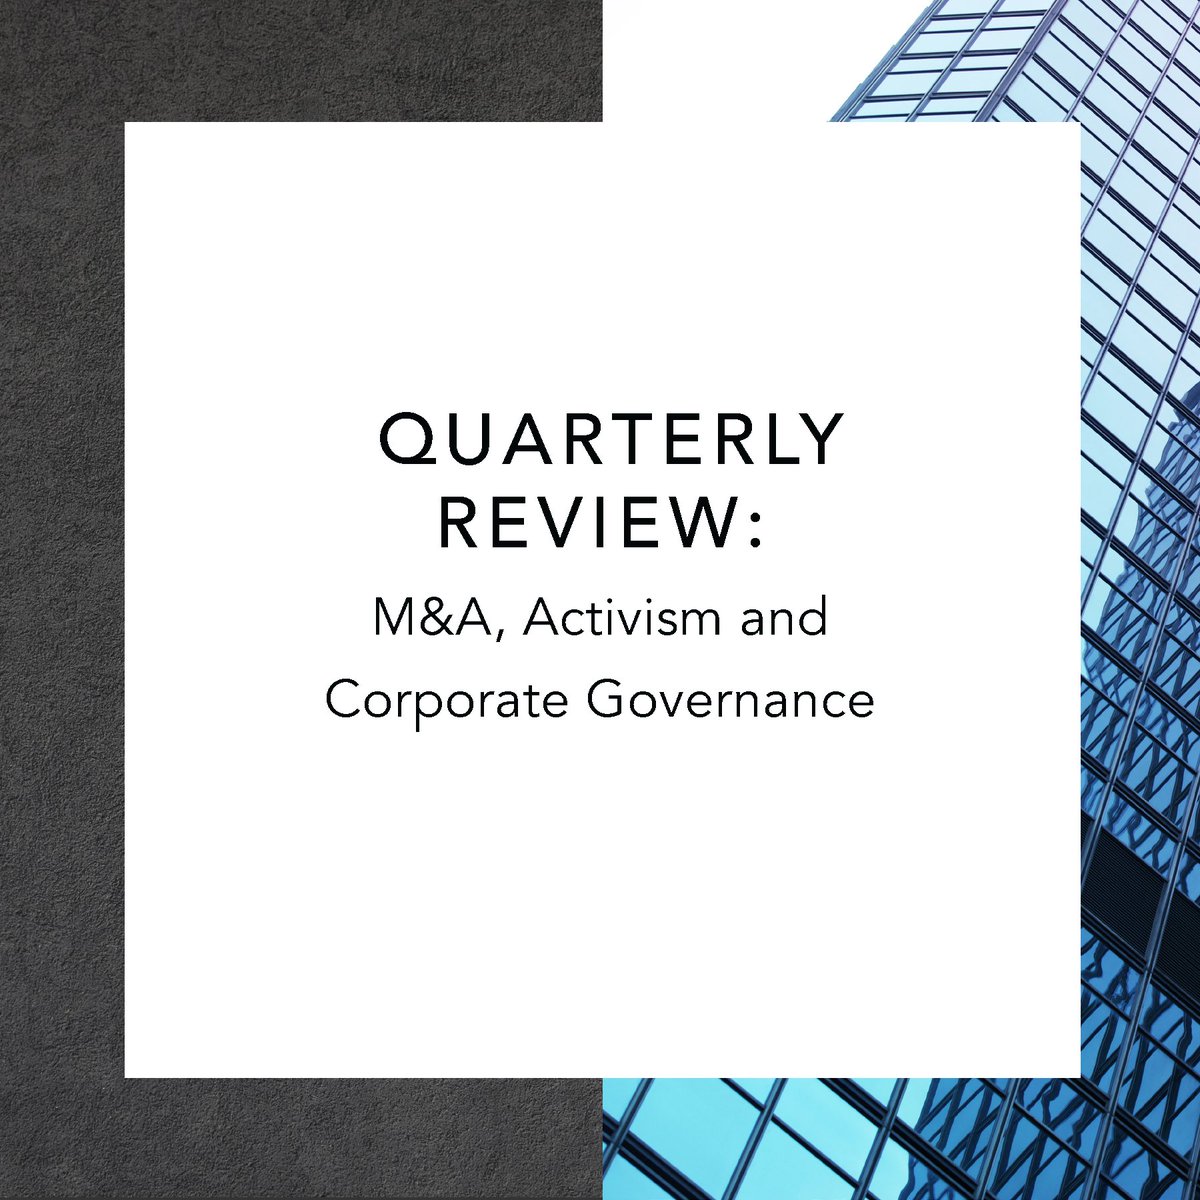 The M&A, Activism and Corporate Governance Quarterly Review brings you the current key legal developments involving #MergersAndAcquisitions, #shareholderactivism and #corporategovernance matters. Access our latest issue: mayerbrown.com/en/insights/pu…